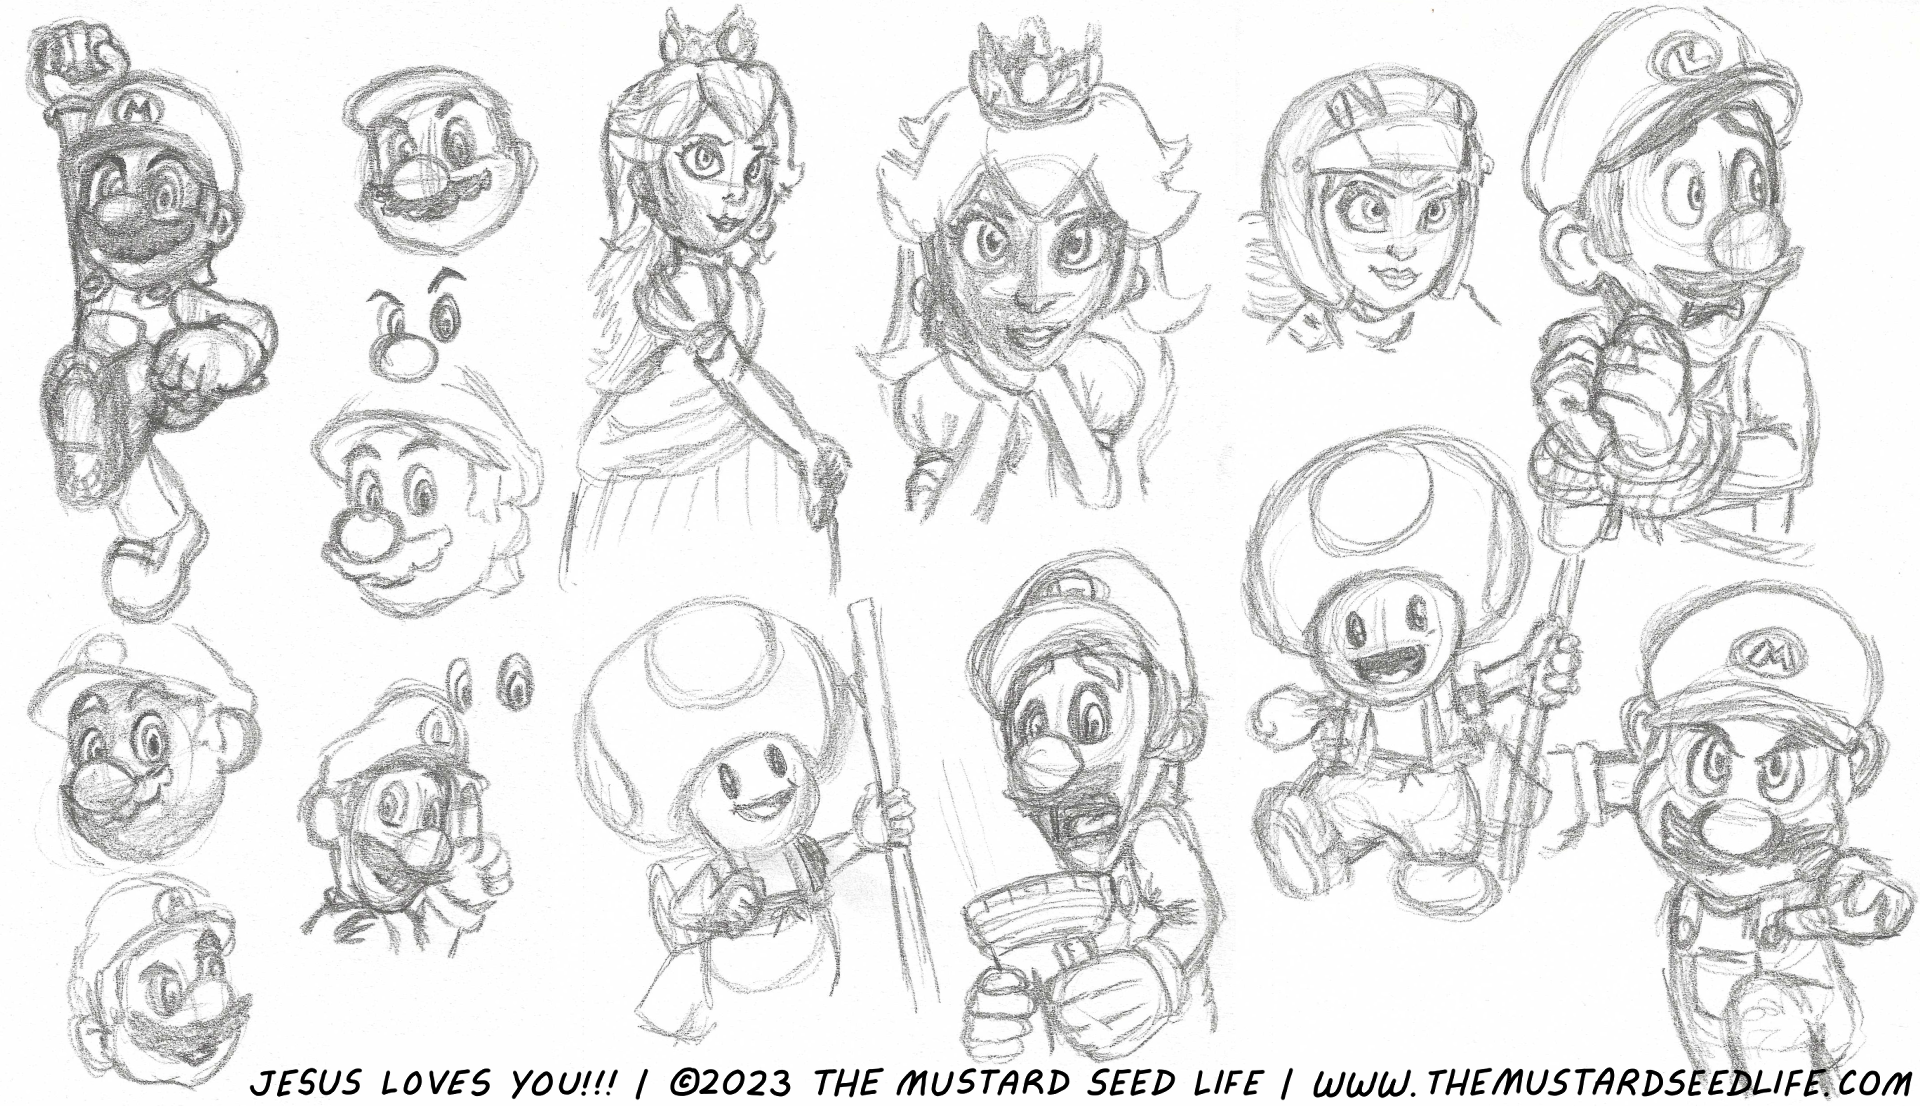 The Super Mario Bros Movie Sketch Studies by Tiny MustardSeed on Dribbble